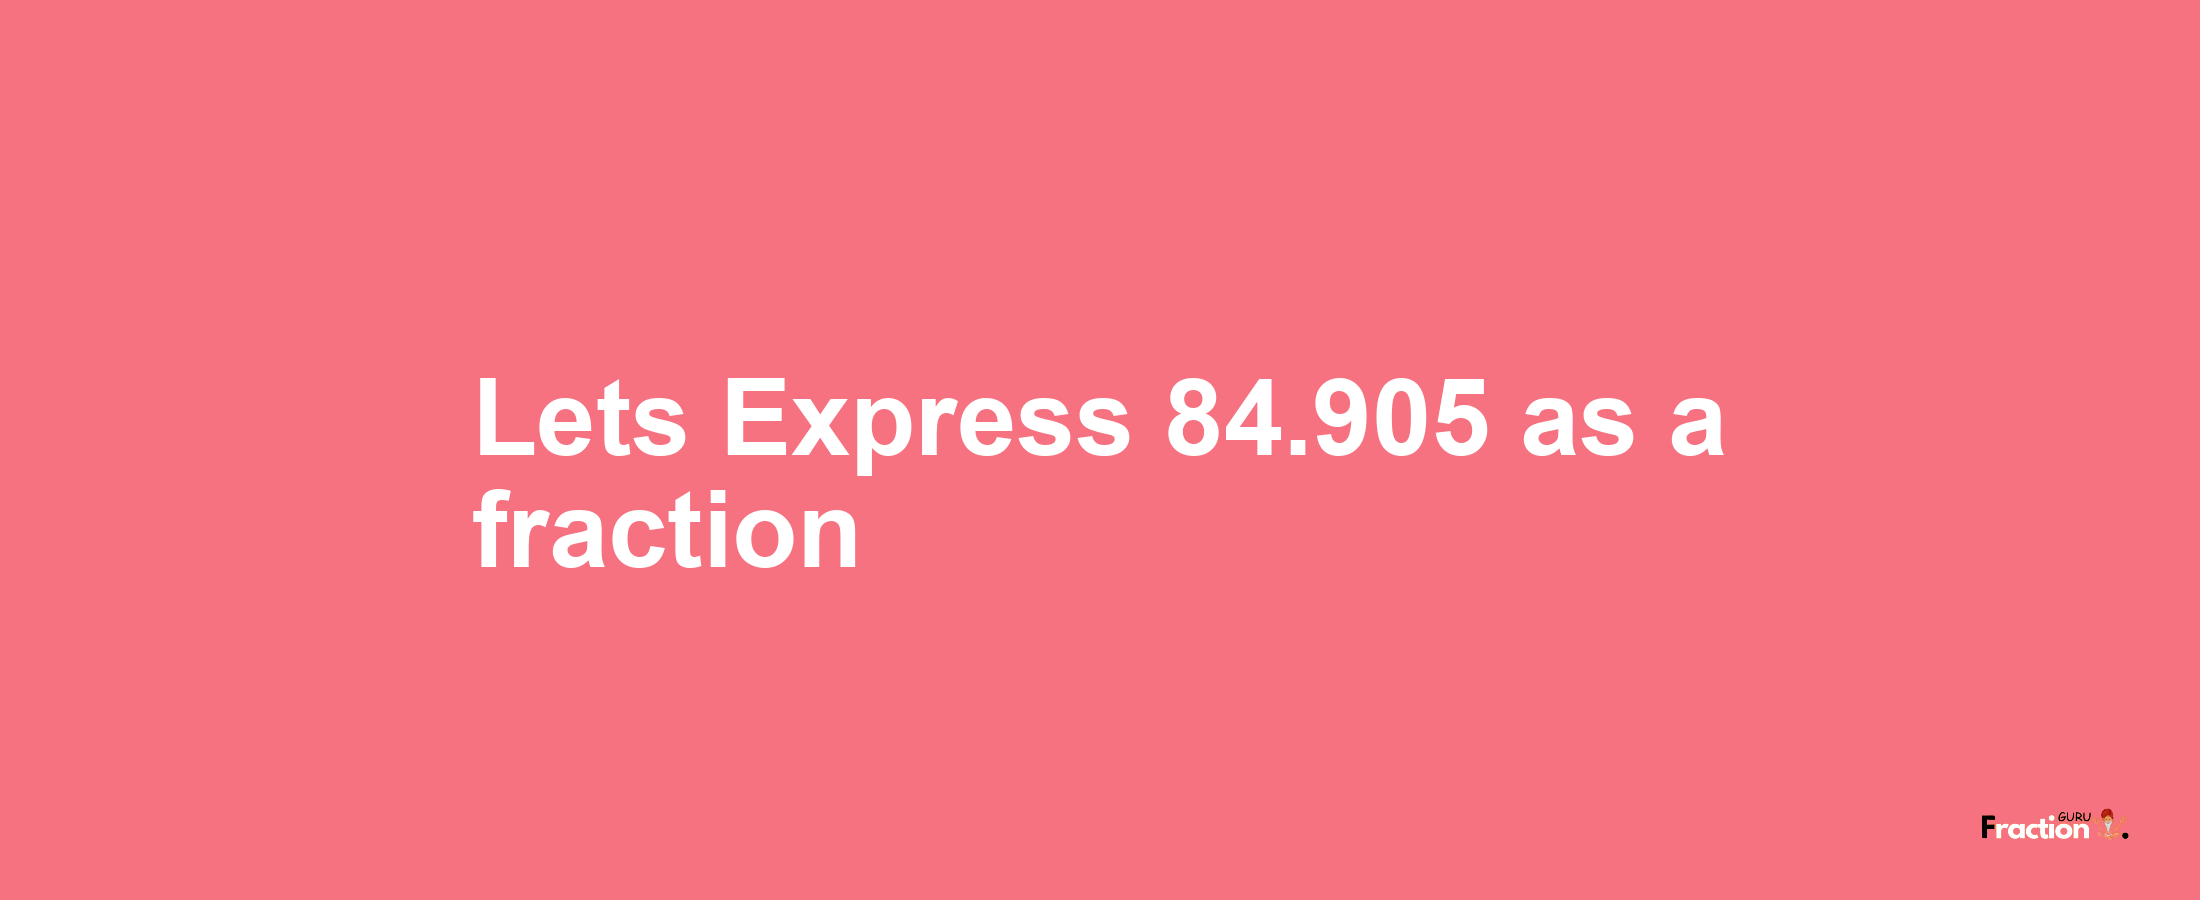 Lets Express 84.905 as afraction